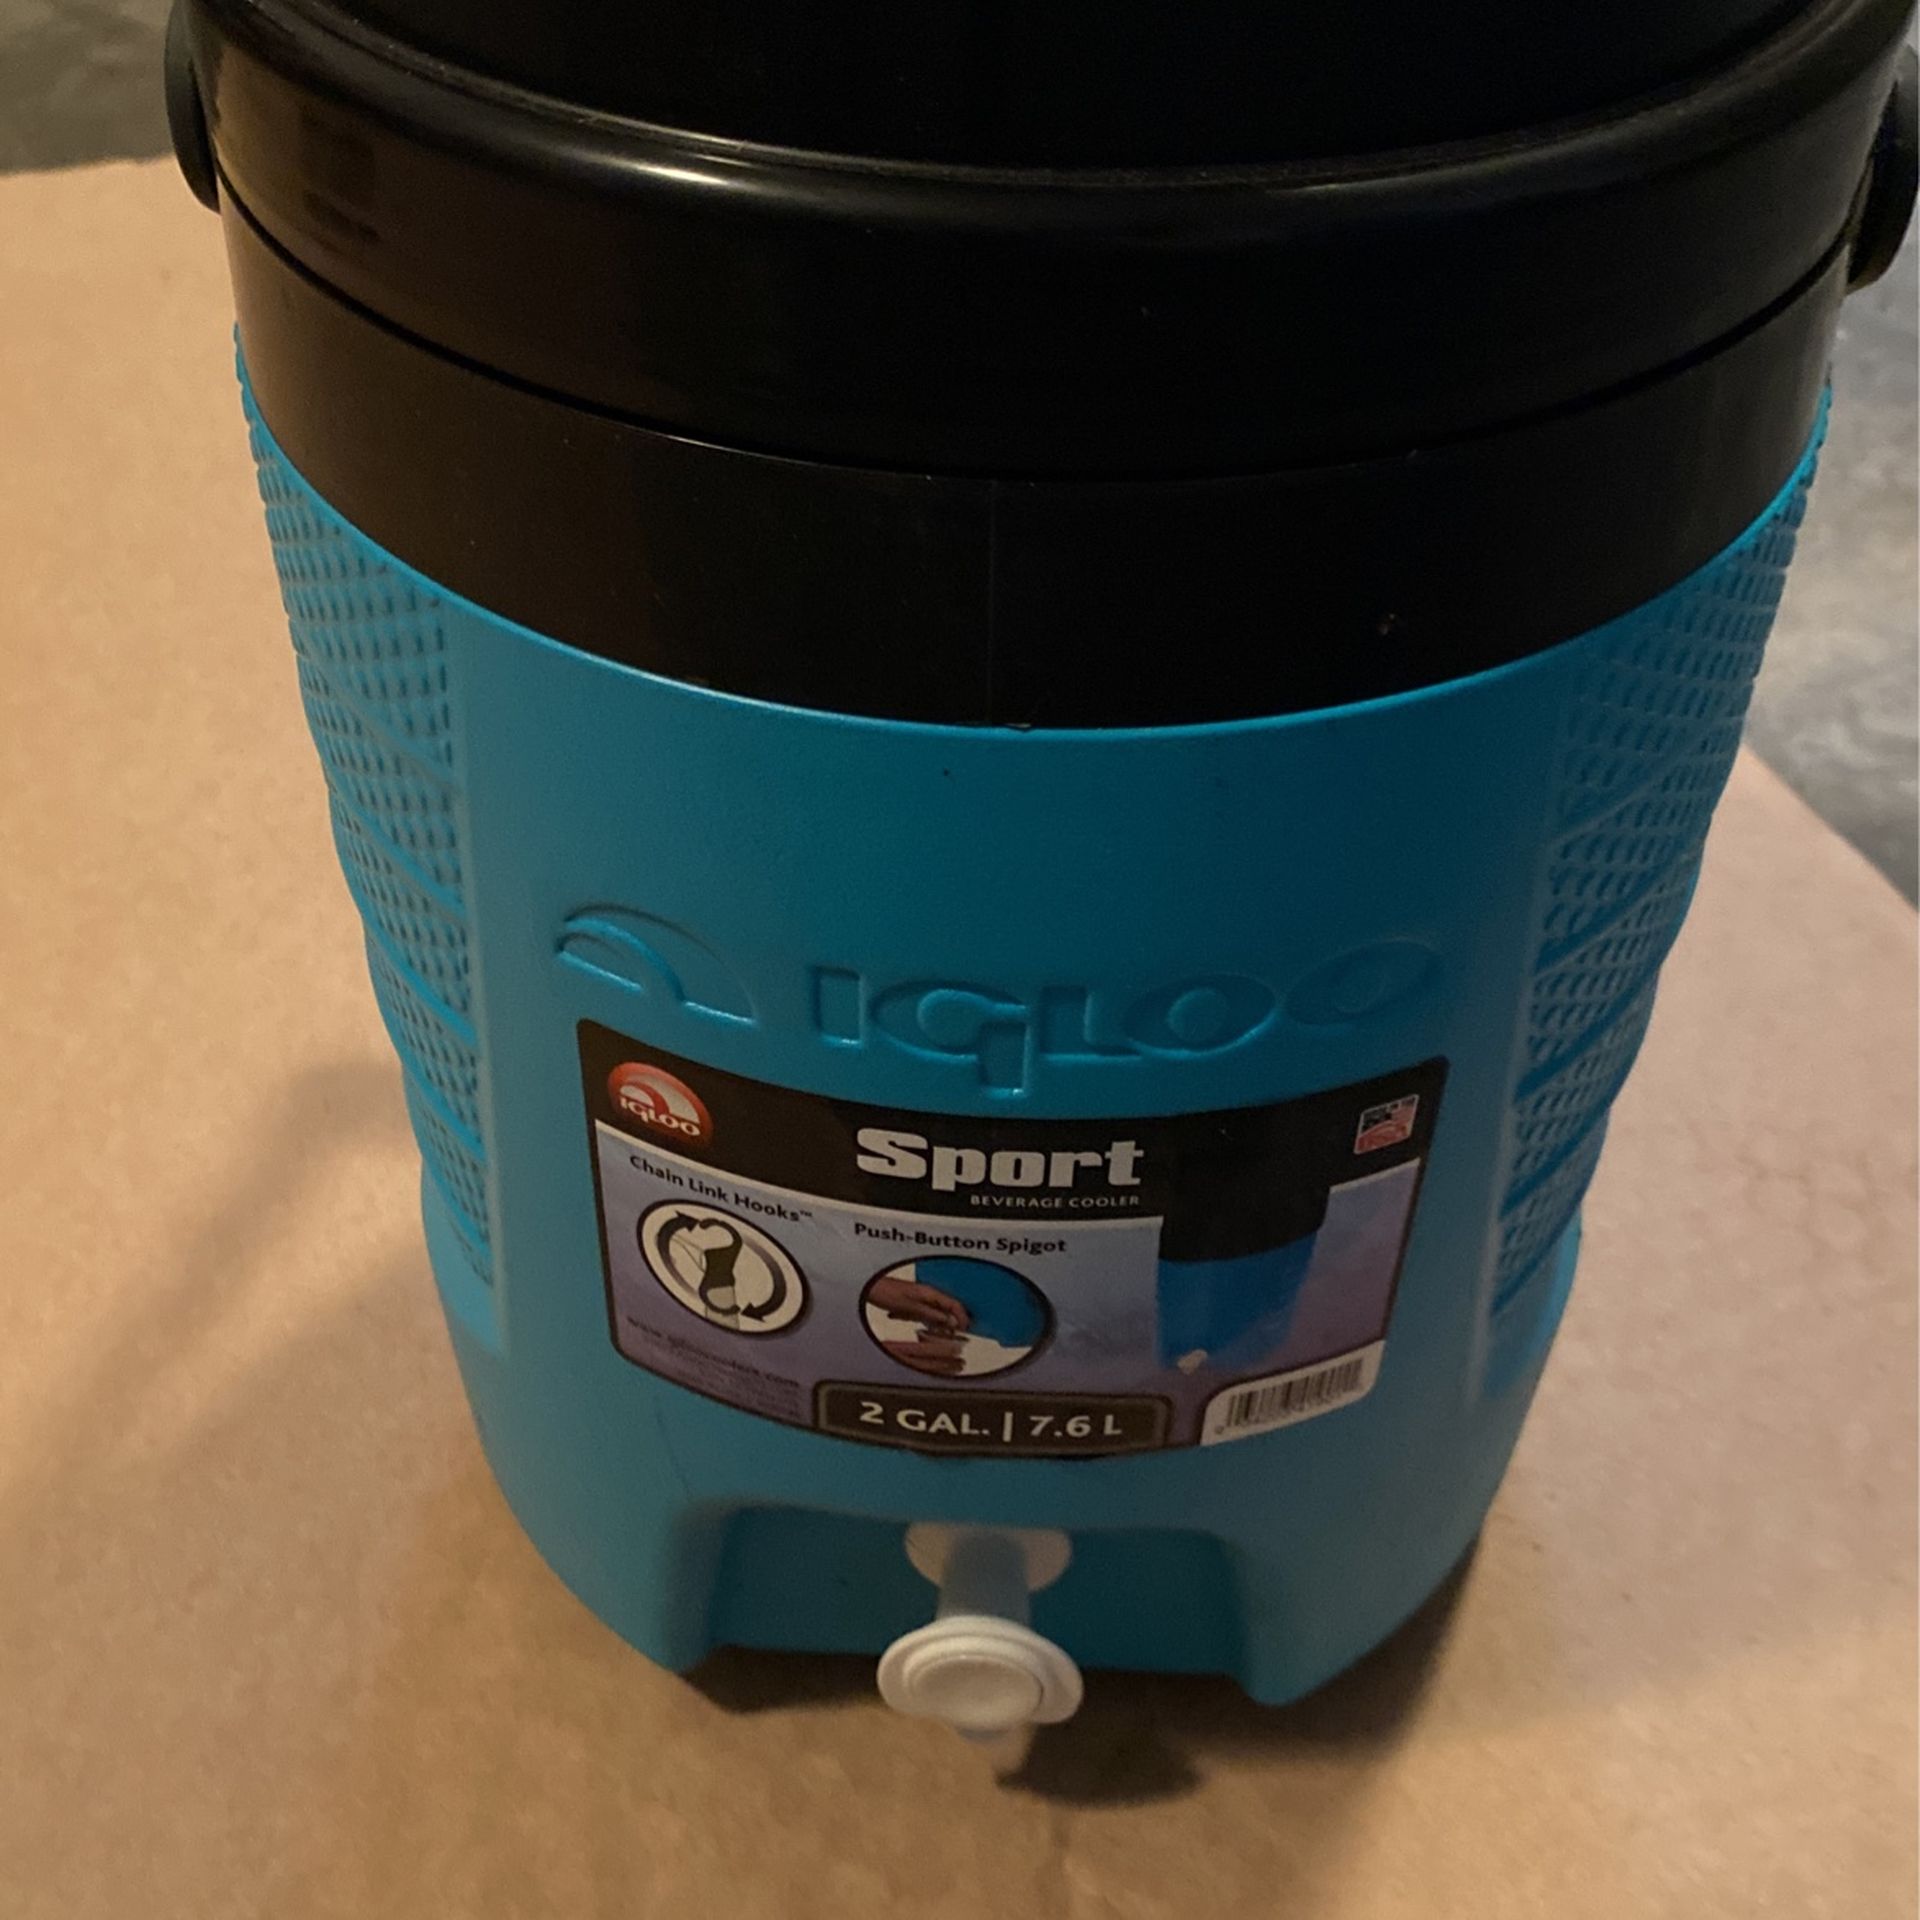 Igloo Sport 2 Gallon Cooler With A Lock On The Top And Comes With A Handle